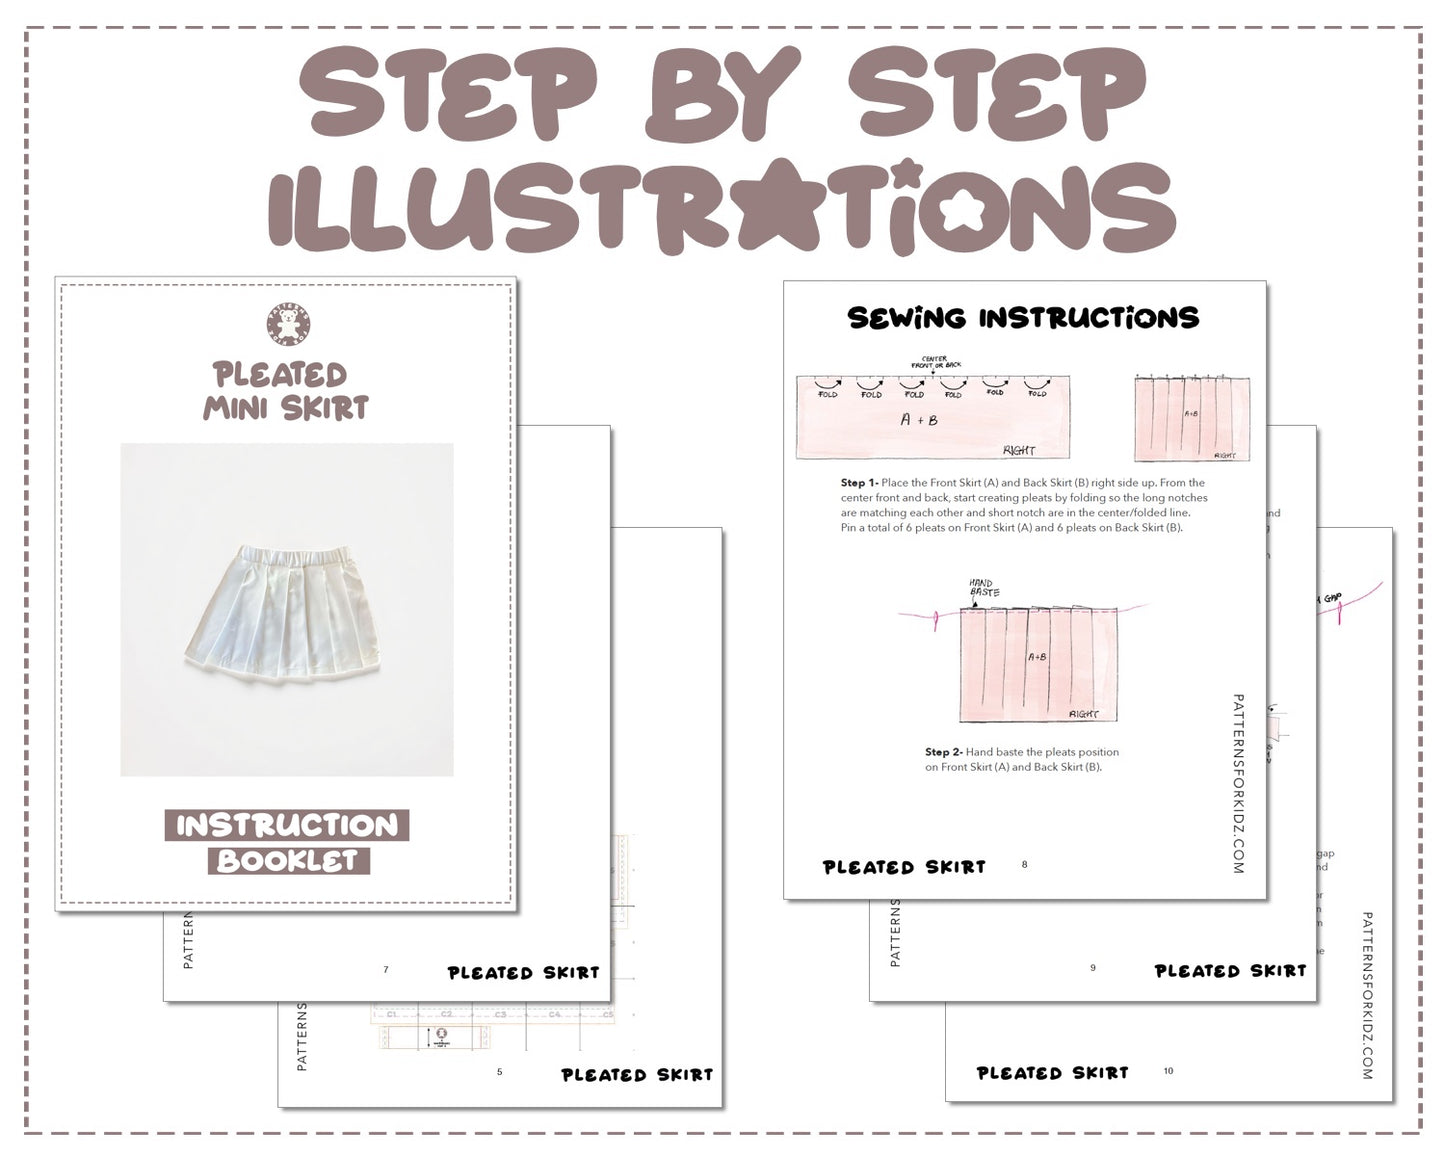 Elastic Waist Pleated Skirt sewing pattern step by step illustrations.